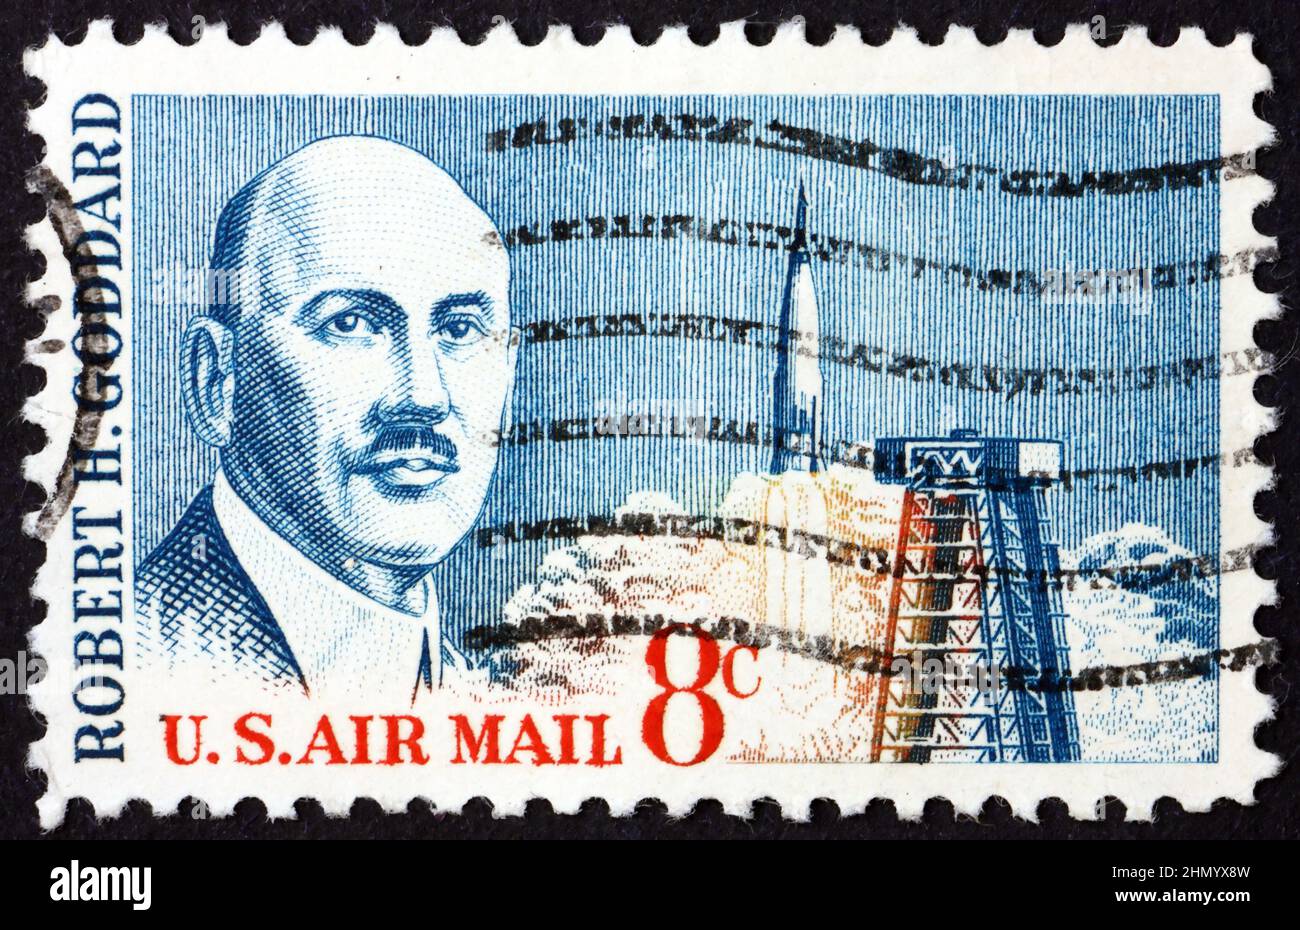 UNITED STATES OF AMERICA - CIRCA 1964: a stamp printed in the United States of America shows Robert H. Goddard, Atlas Rocket and Launching Tower, Cape Stock Photo